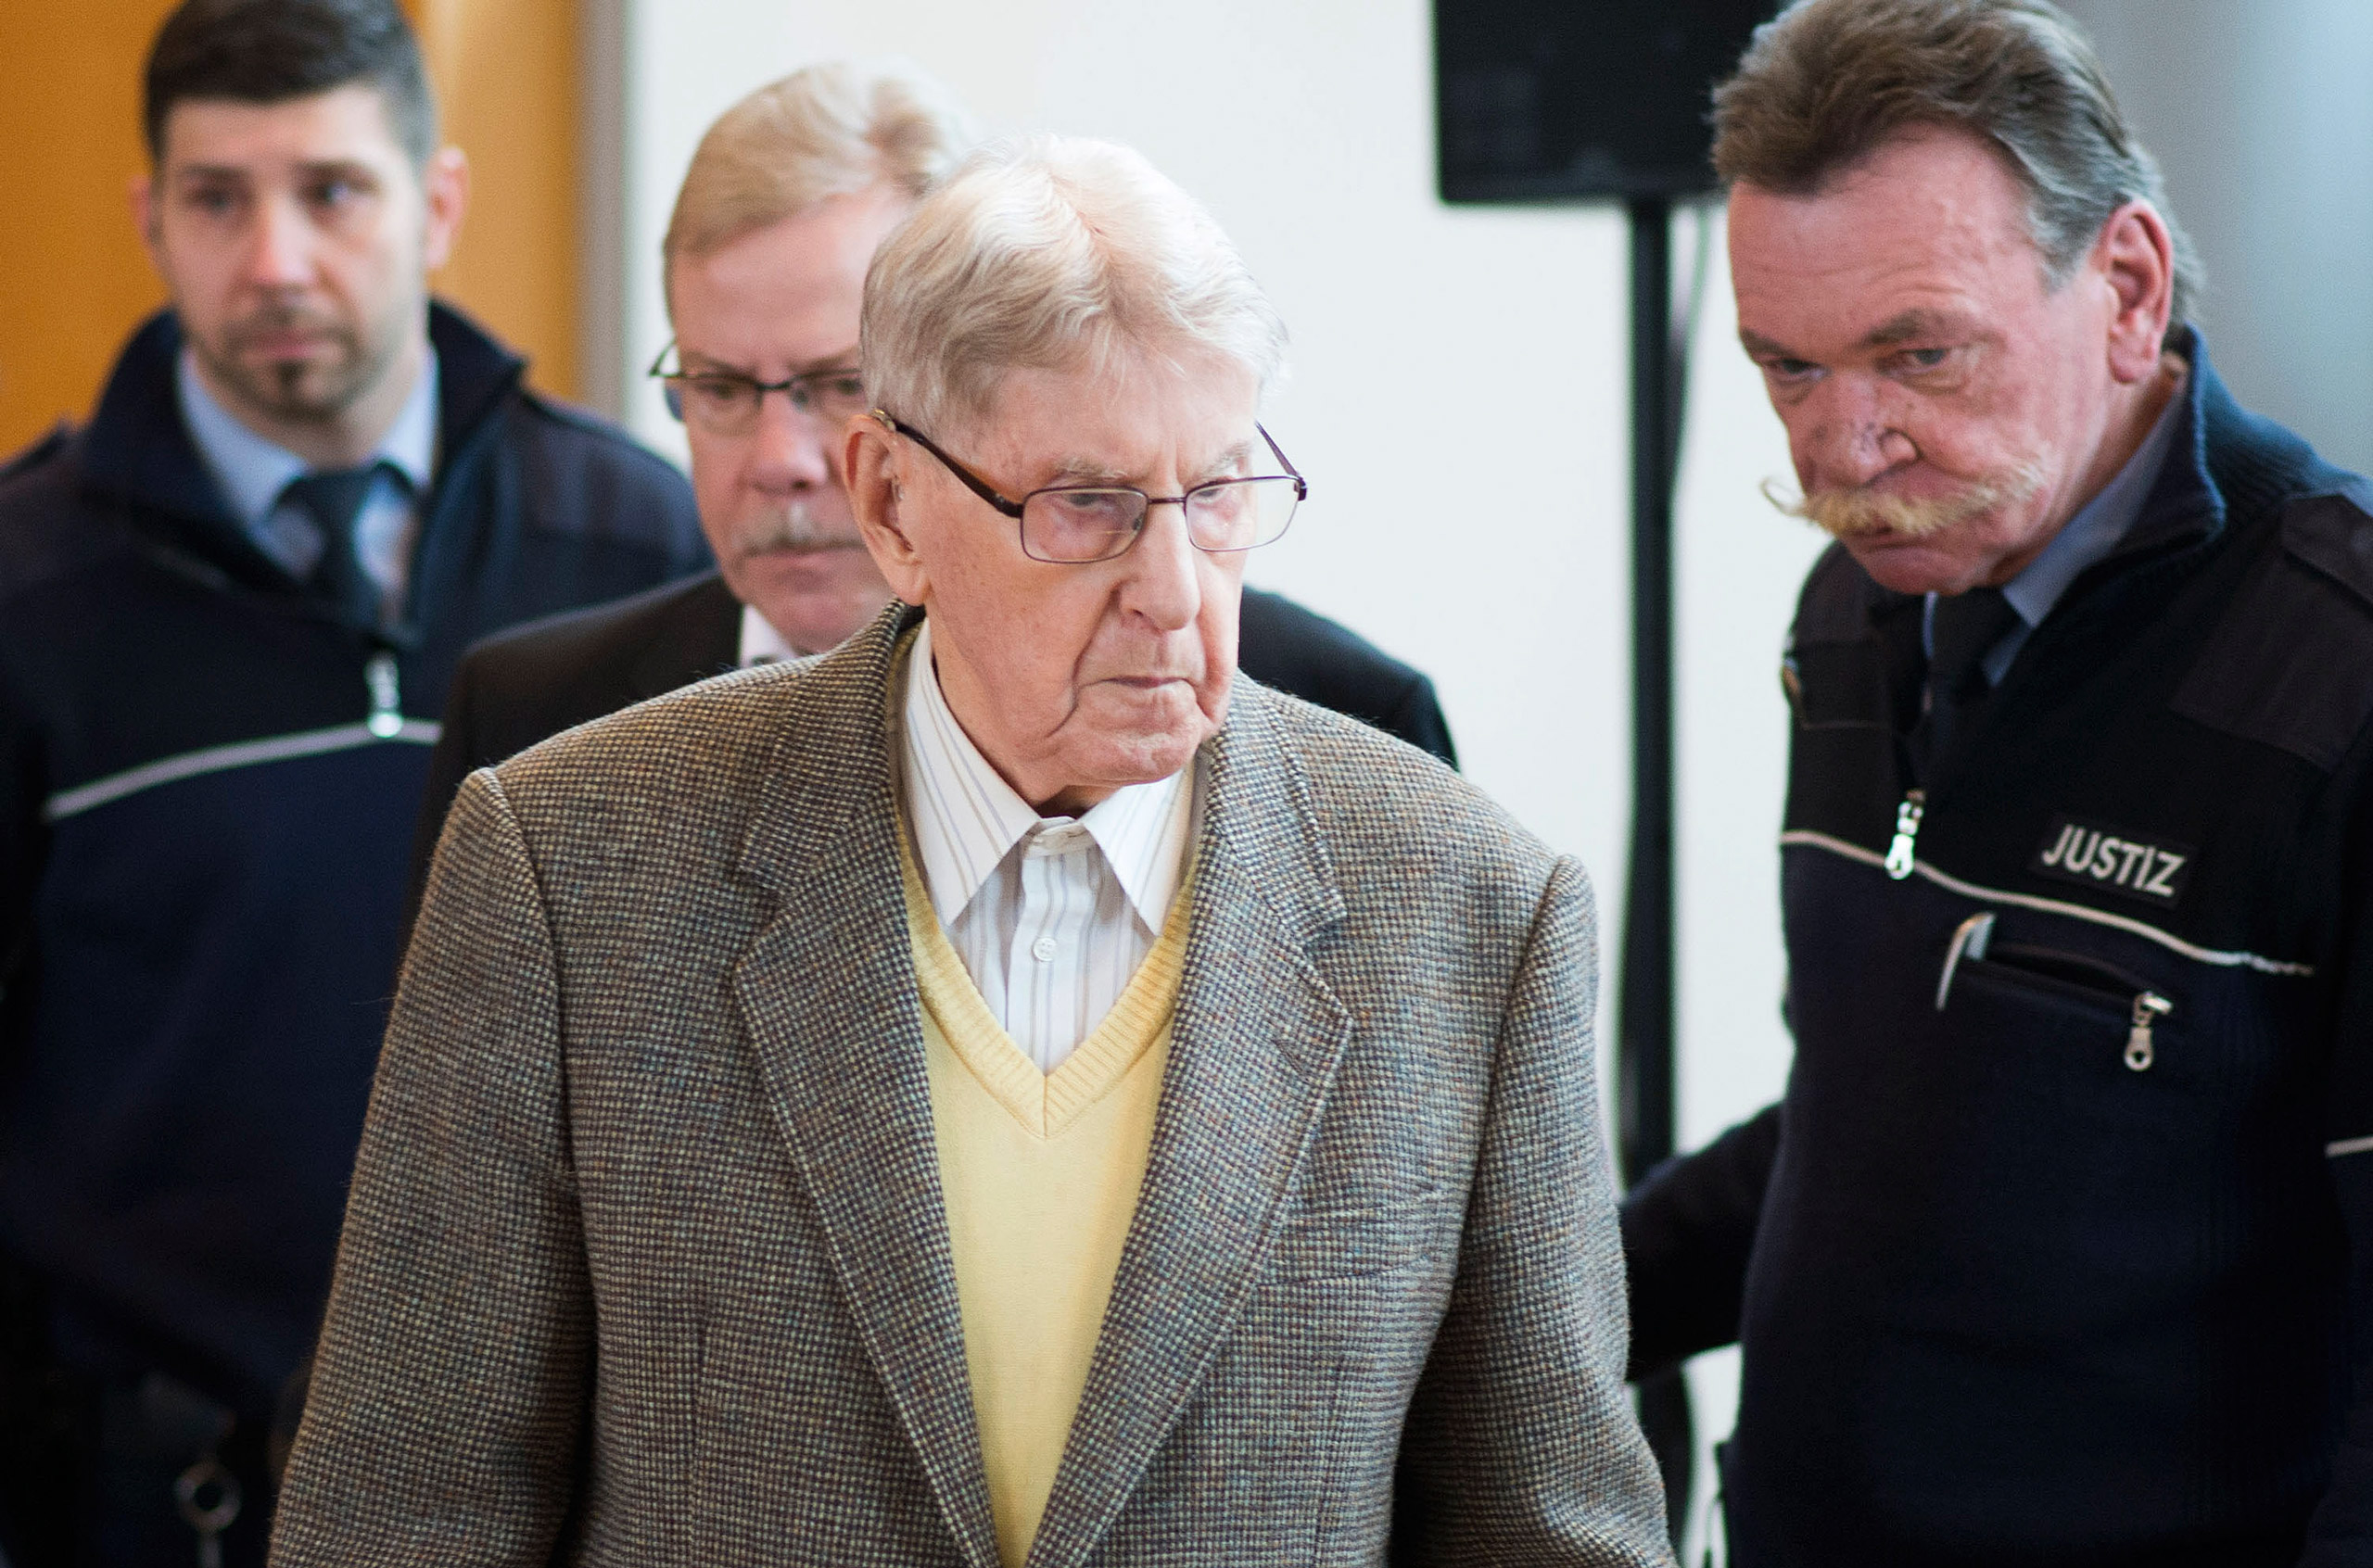 Hanning, a 94-year-old former guard at Auschwitz, arrives in the courtroom before his trial in Detmold